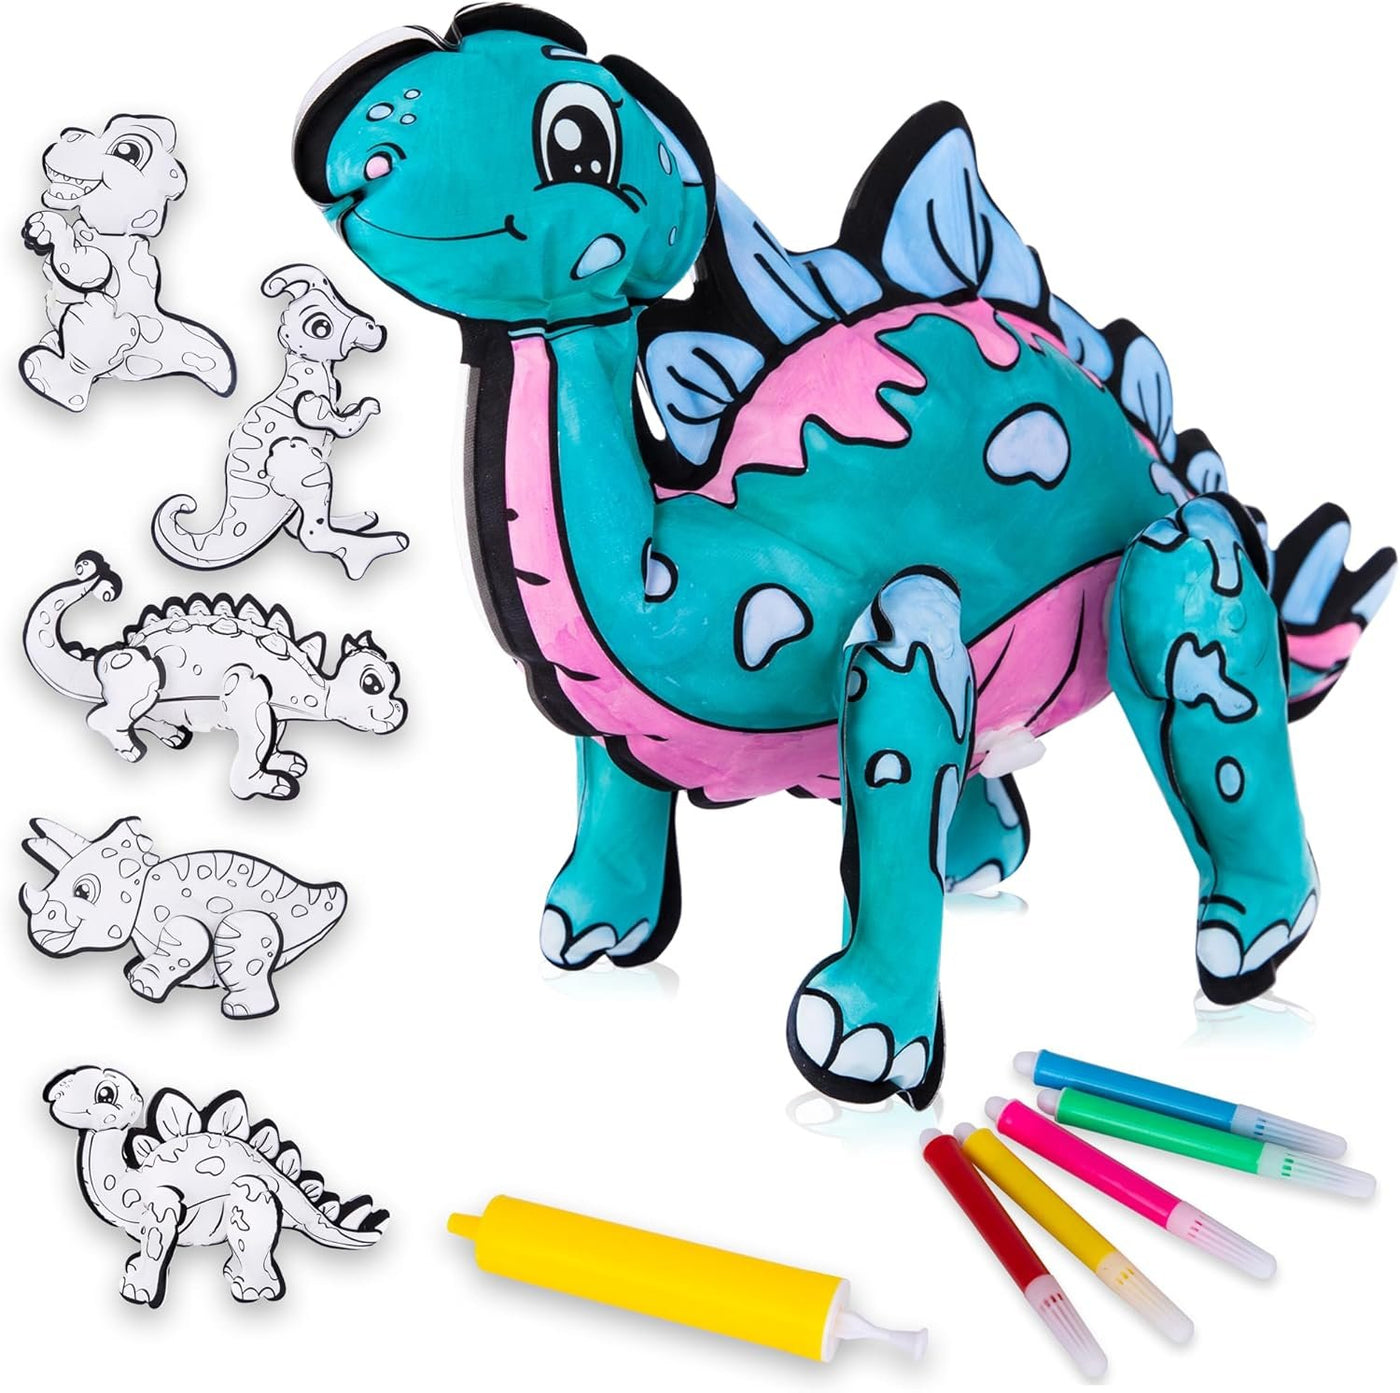 Dinosaur adventure: coloring books for kids ages 4-8 girls boys